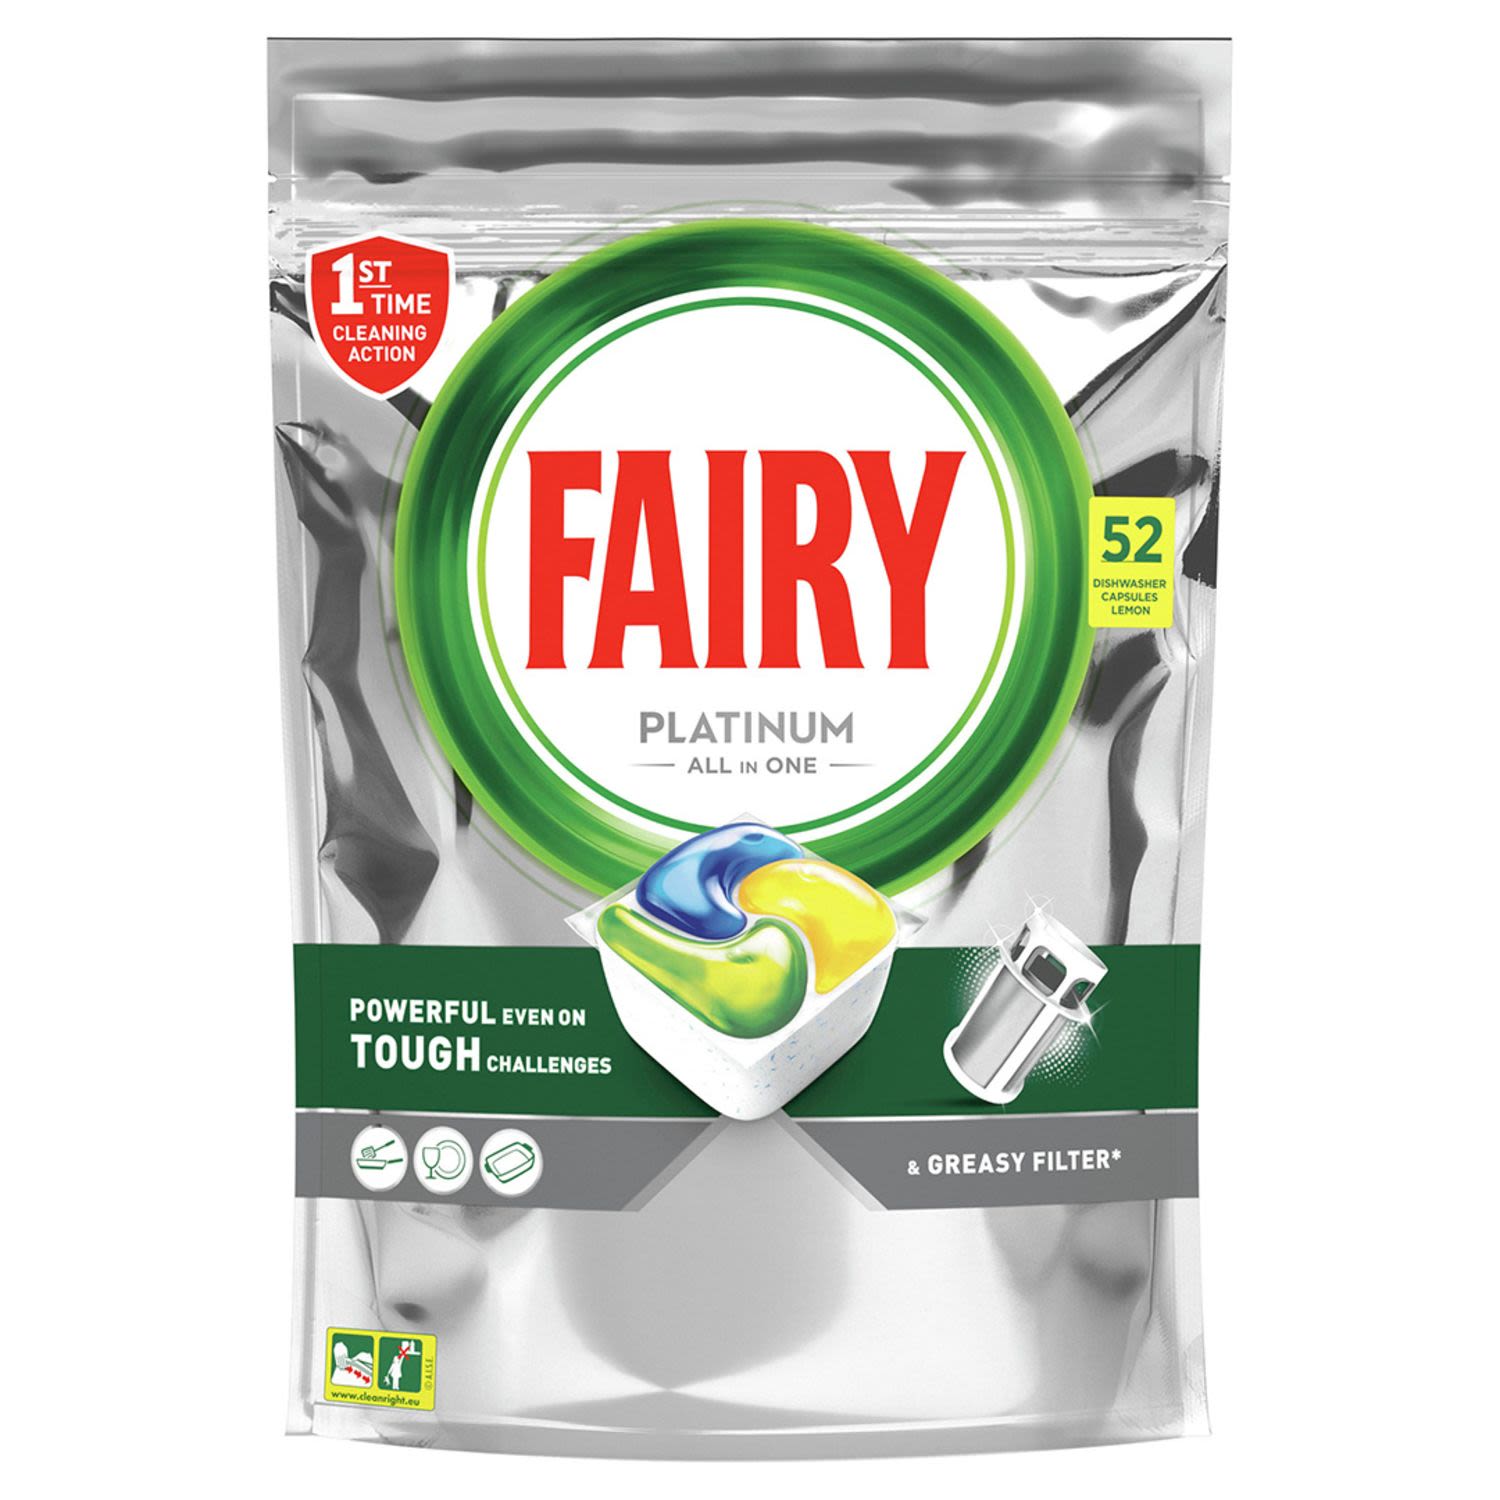 Fairy Platinum All In One Lemon Automatic Dishwasher Tablets, 52 Each